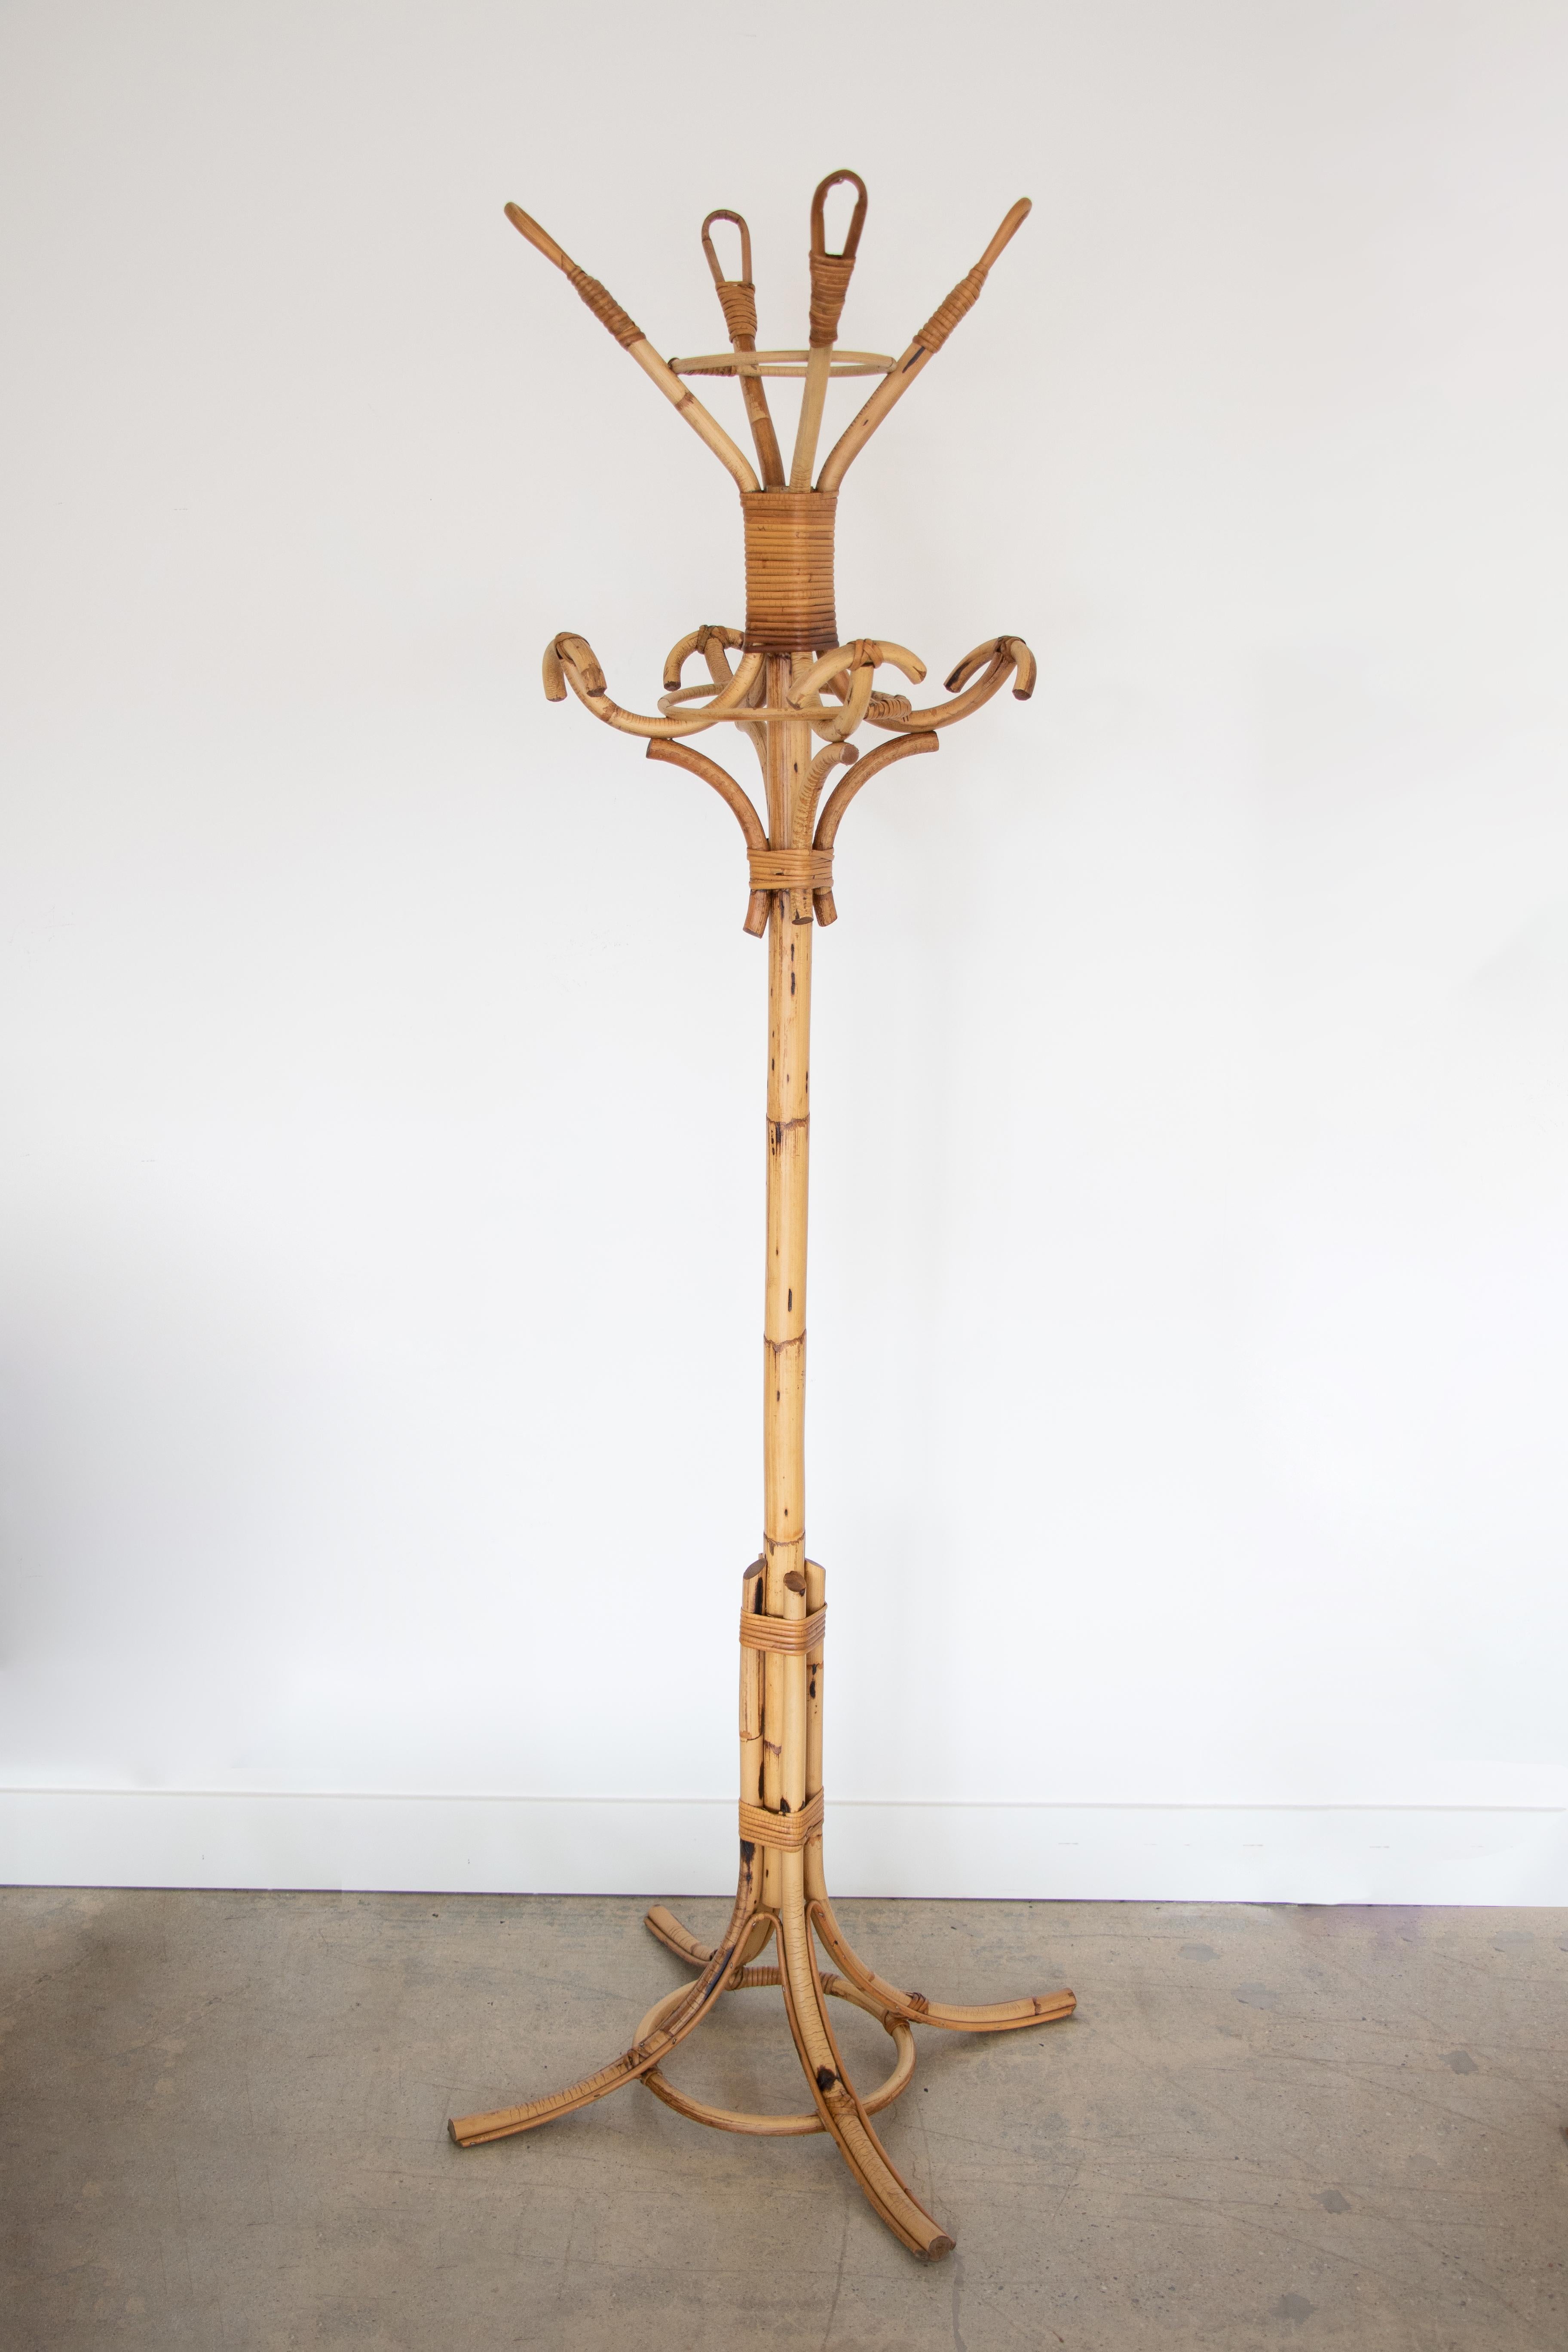 Vintage Italian rattan and bamboo standing coat rack attributed to Vittorio Bonacina. Beautiful hooks with 4 top loops and 4 arched rattan pieces to hang coats or hats. Great wrapped rattan detailing. 

Additional measurements: top diameter 17.5